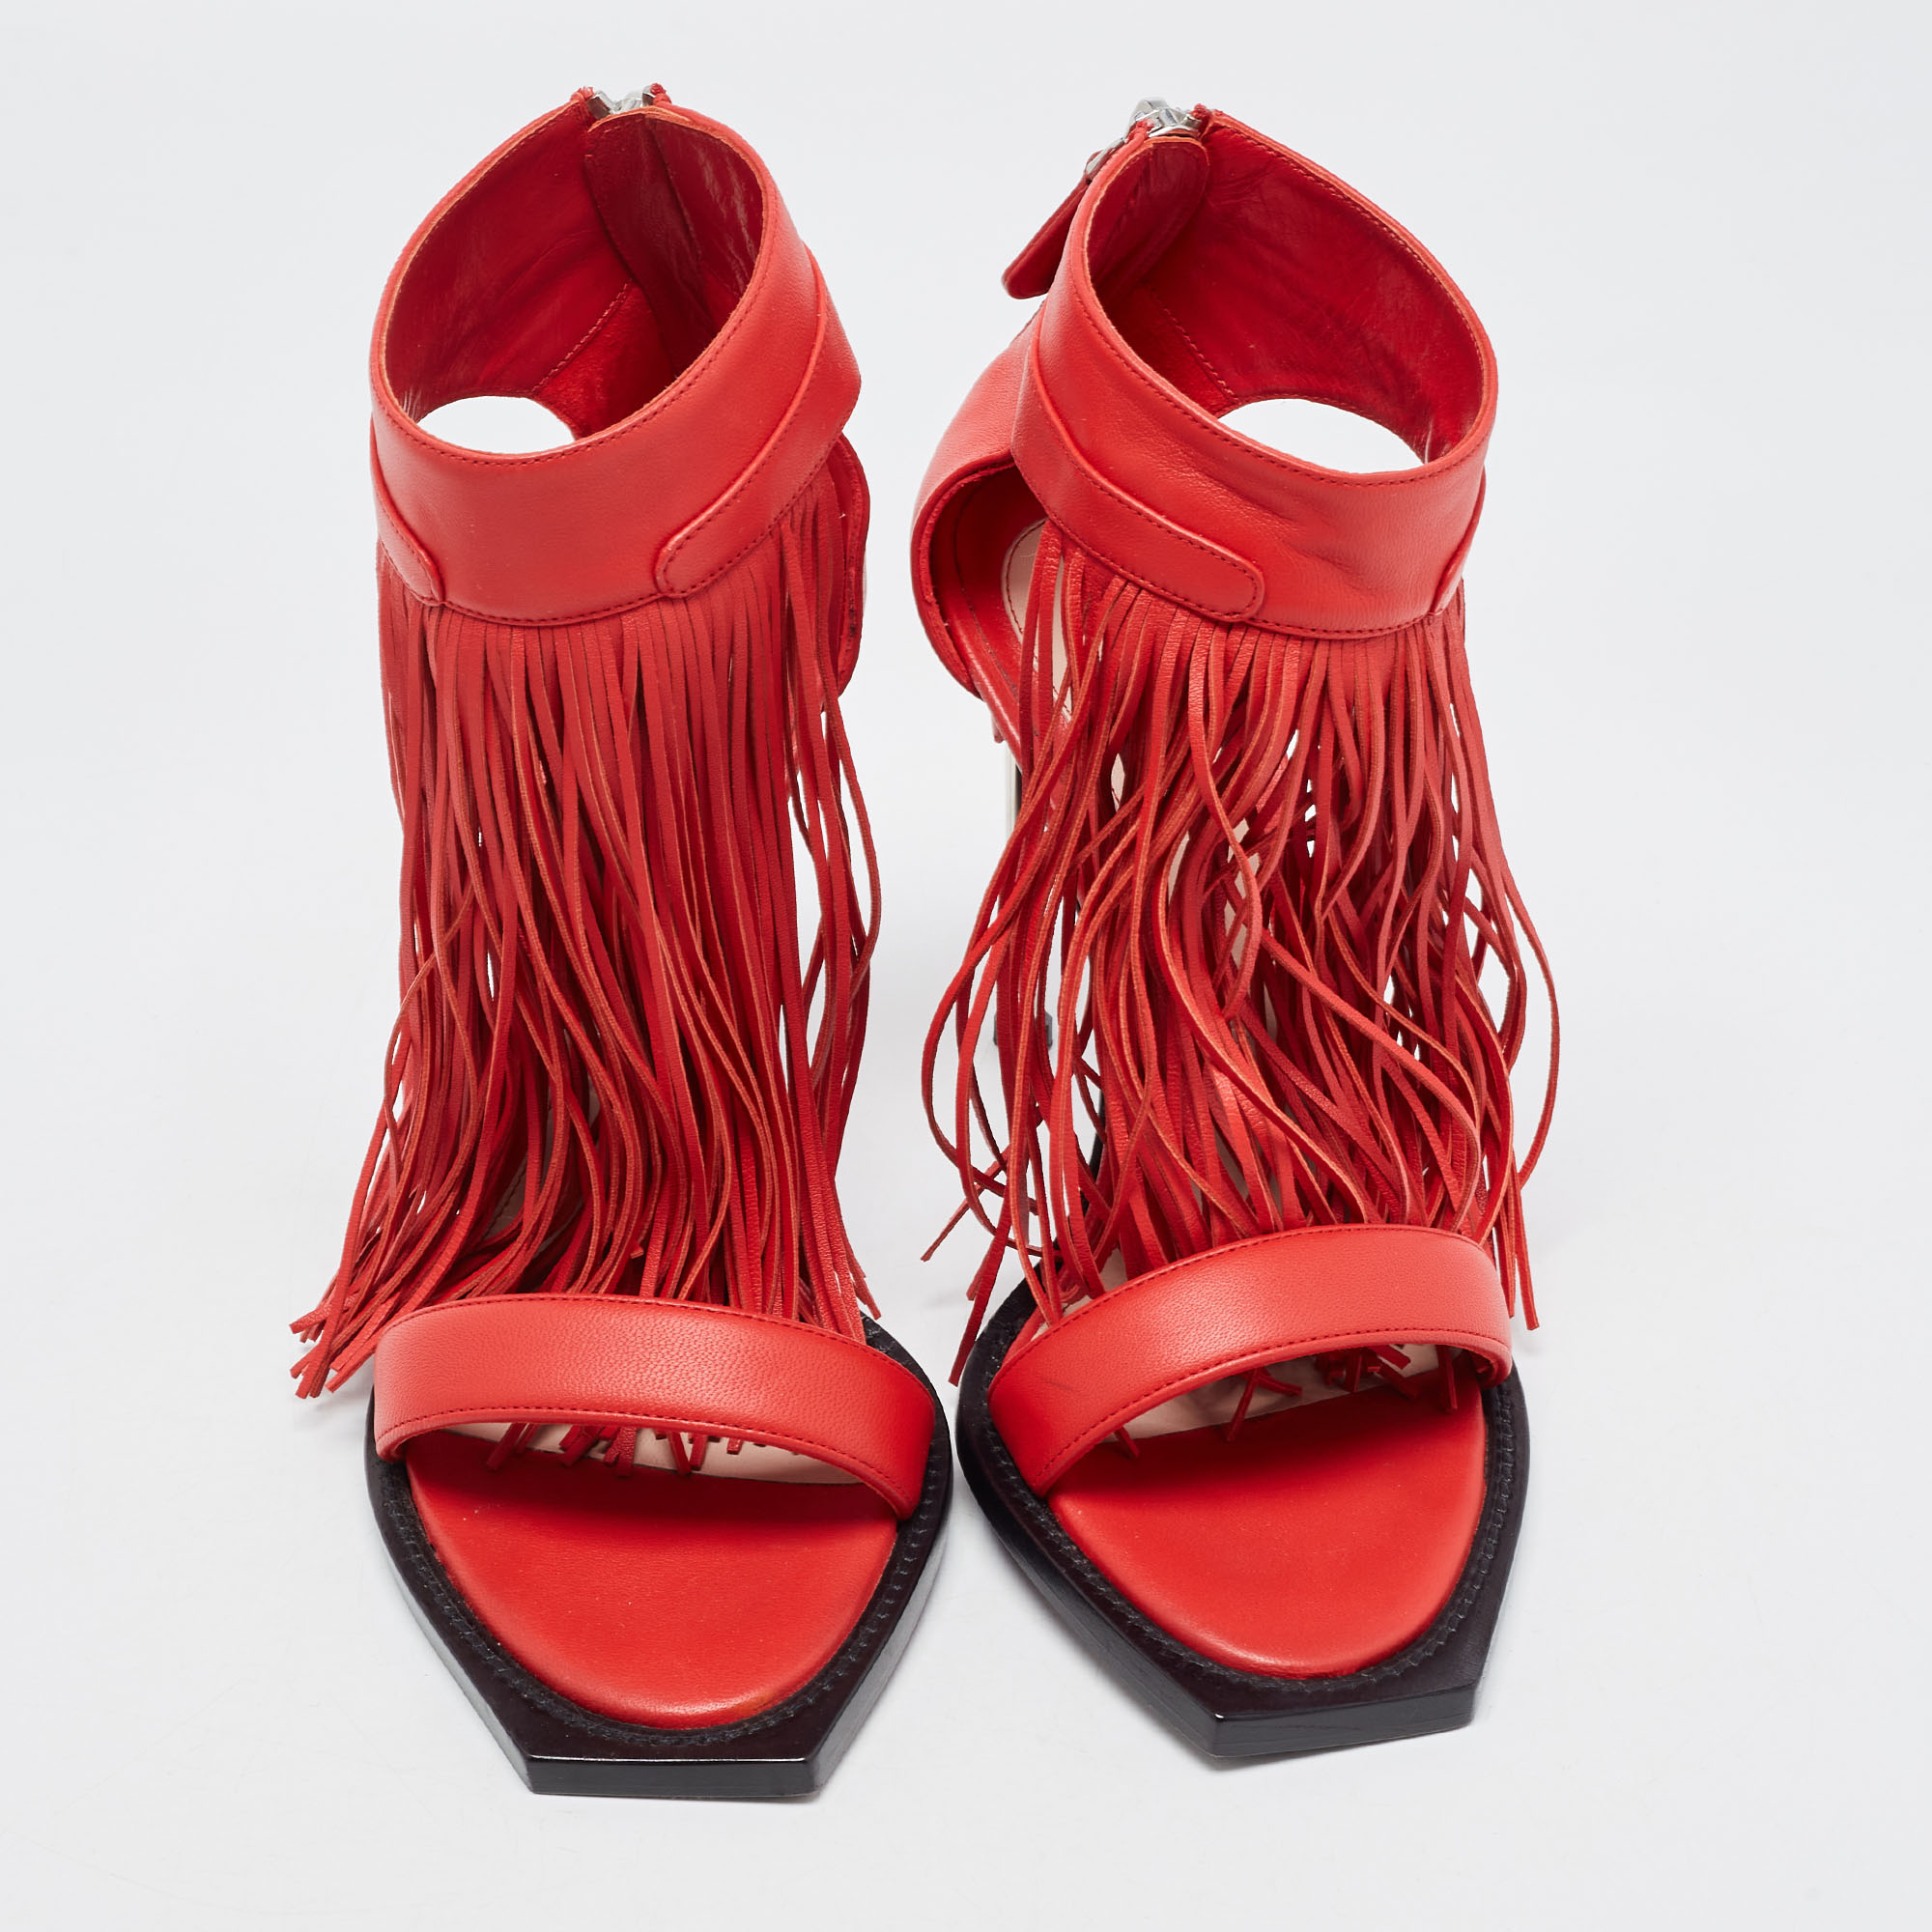 Alexander McQueen Red Leather Fringed Ankle Strap Sandals Size 38.5